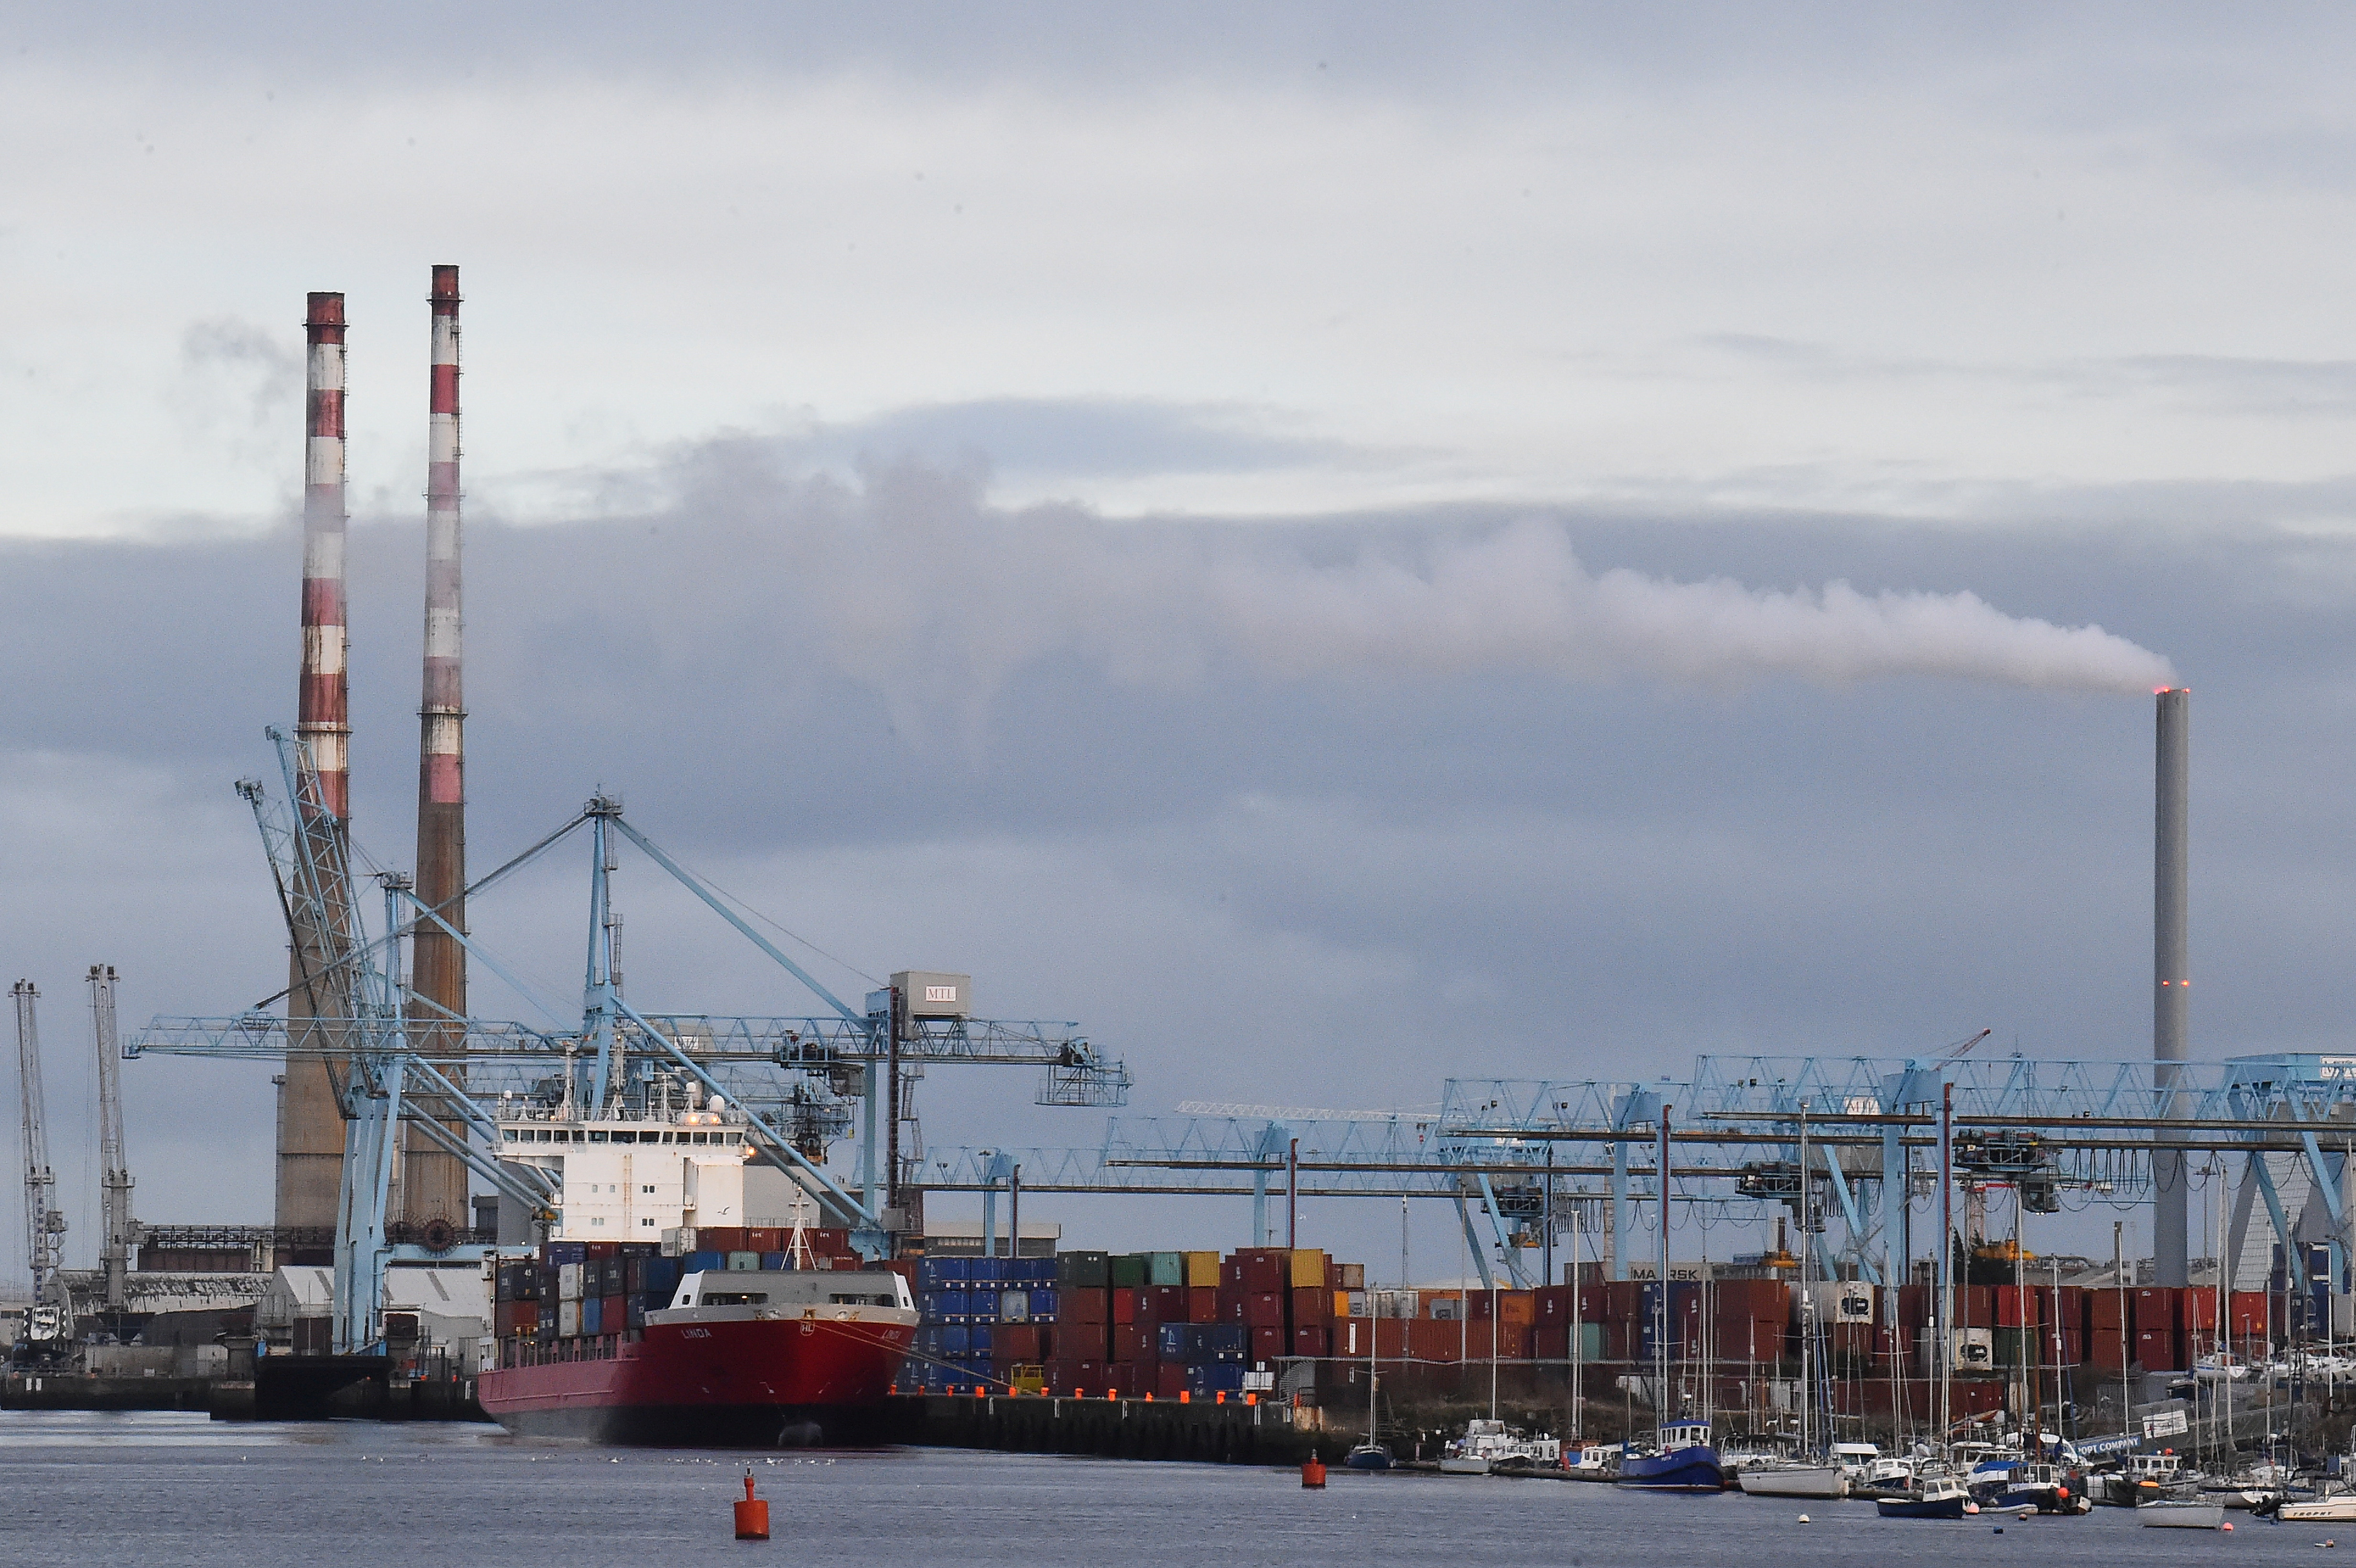 Cargo ship loading containers is seen at Dublin Port